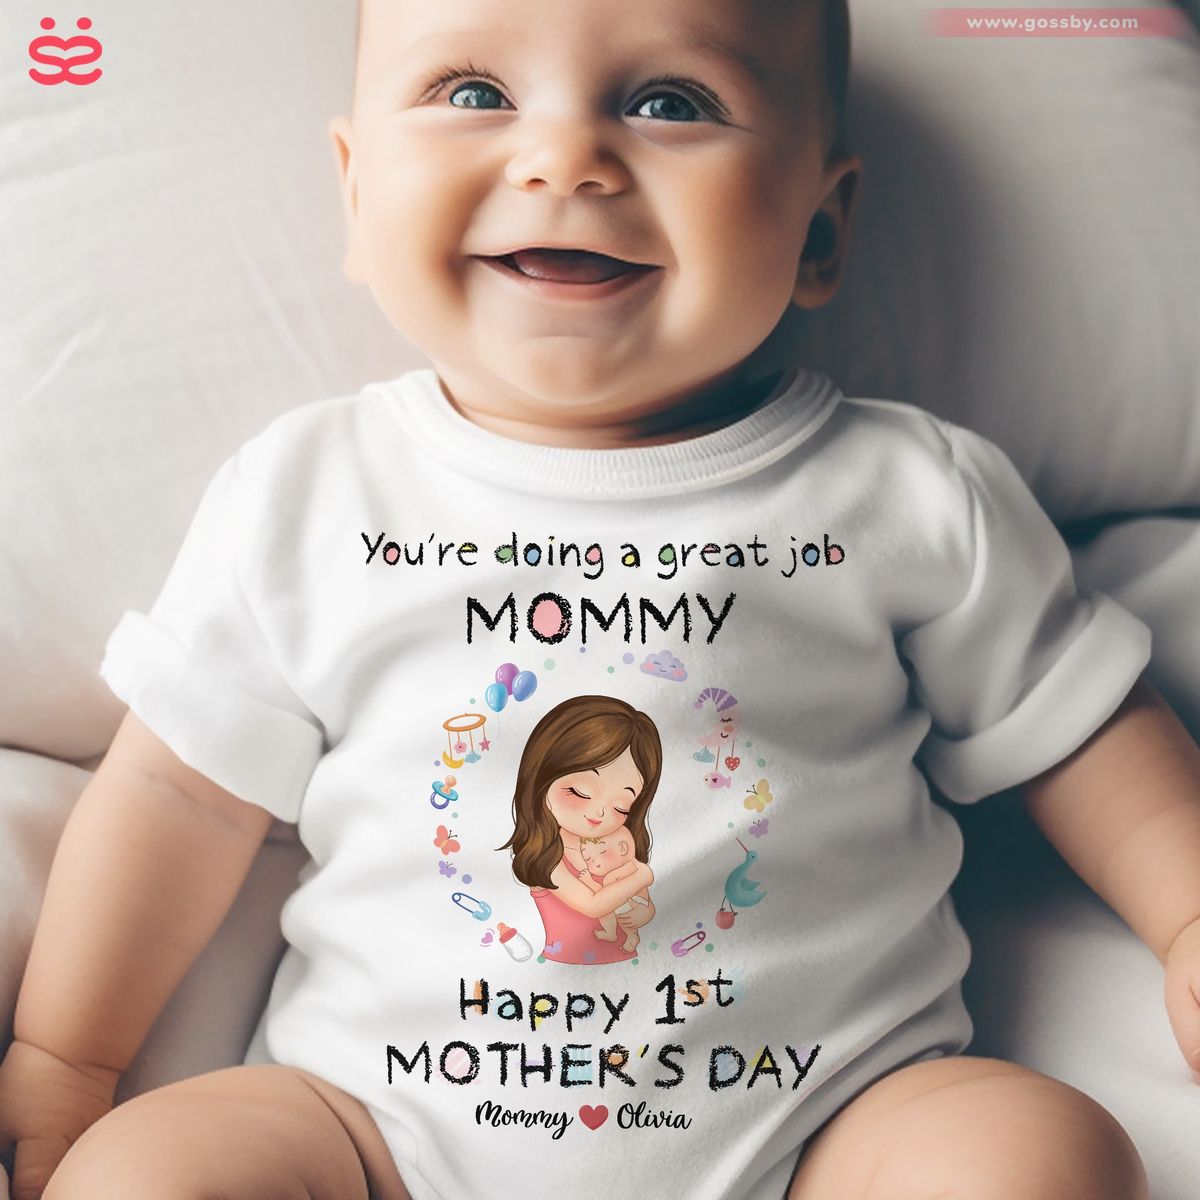 Personalized Shirt - Custom Baby Onesies - You're doing a great job mommy Happy our 1st Mother's Day (ver 3)_1